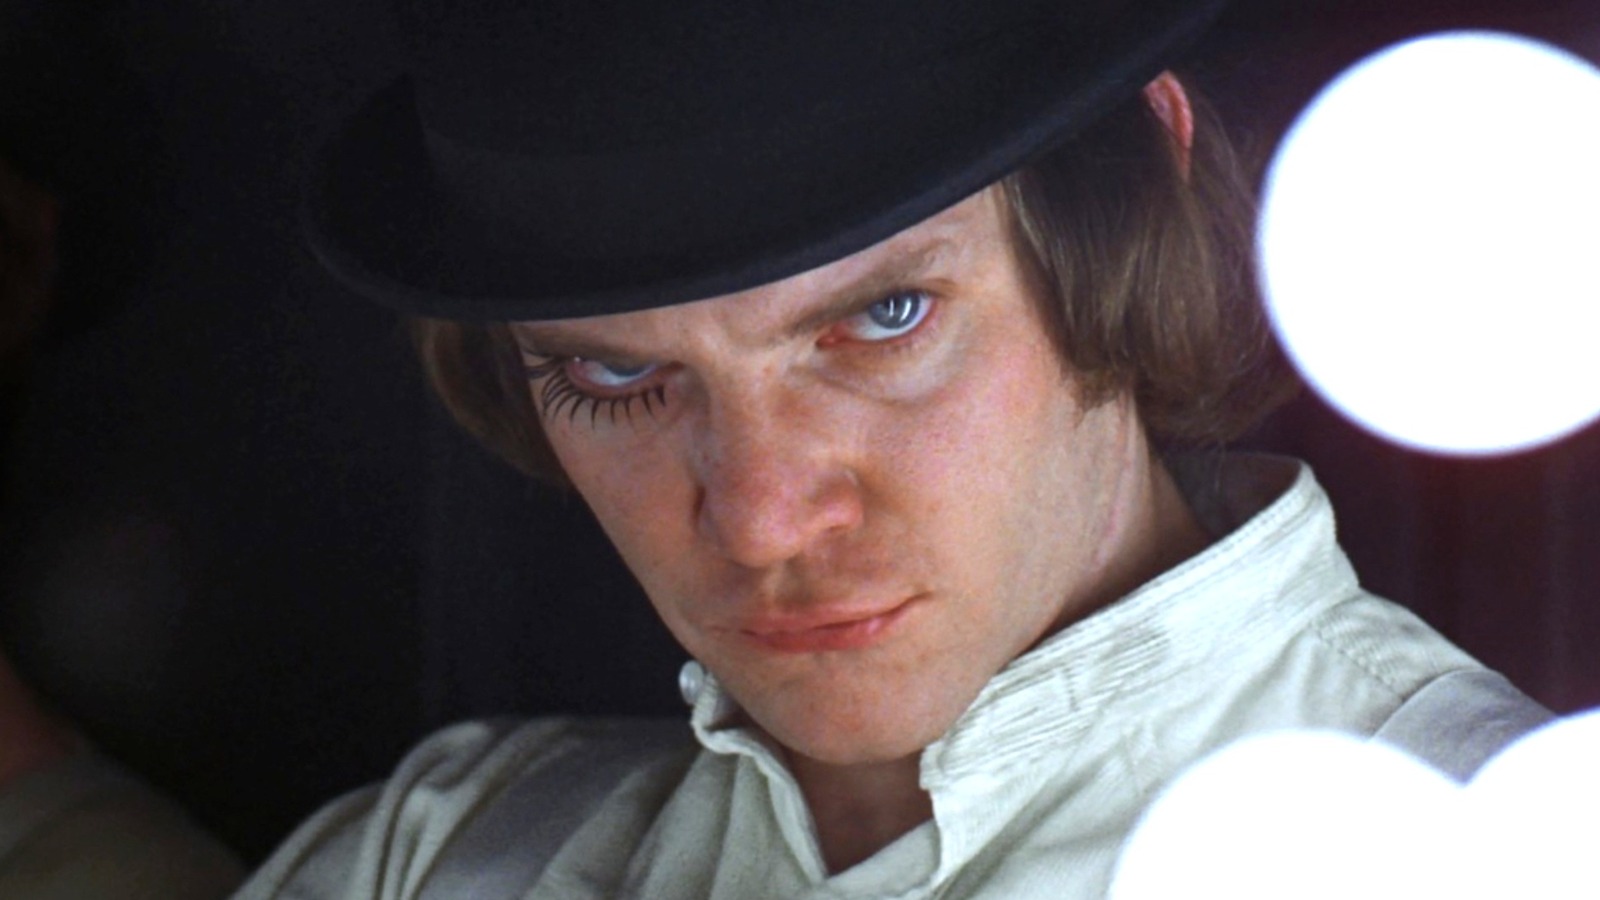 The Insane Amount Of Cut Footage We'll Never See In A Clockwork Orange